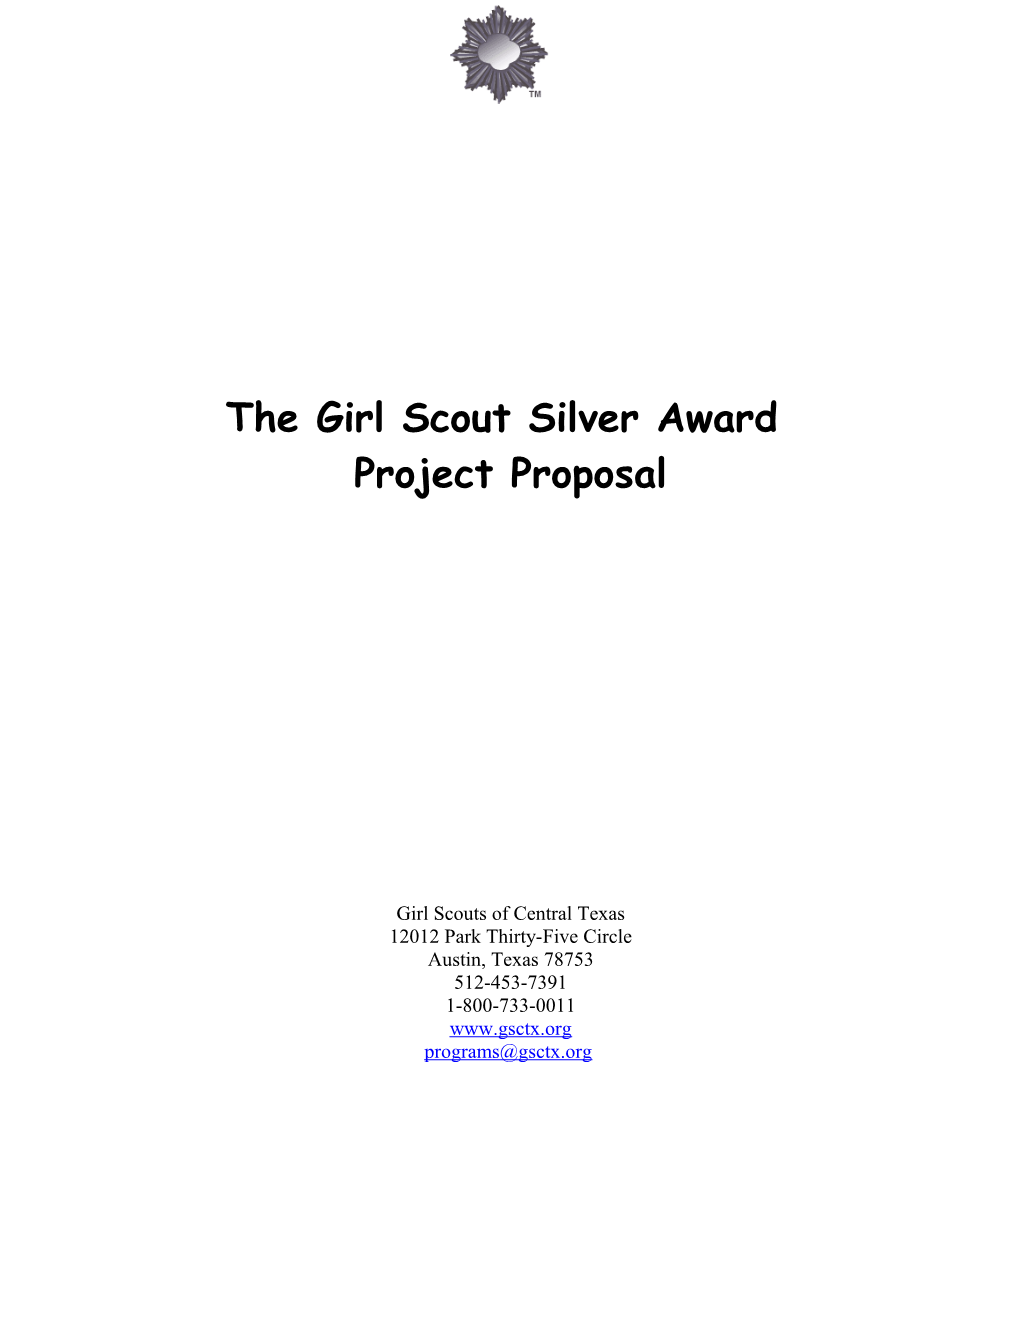 The Girl Scout Silver Award